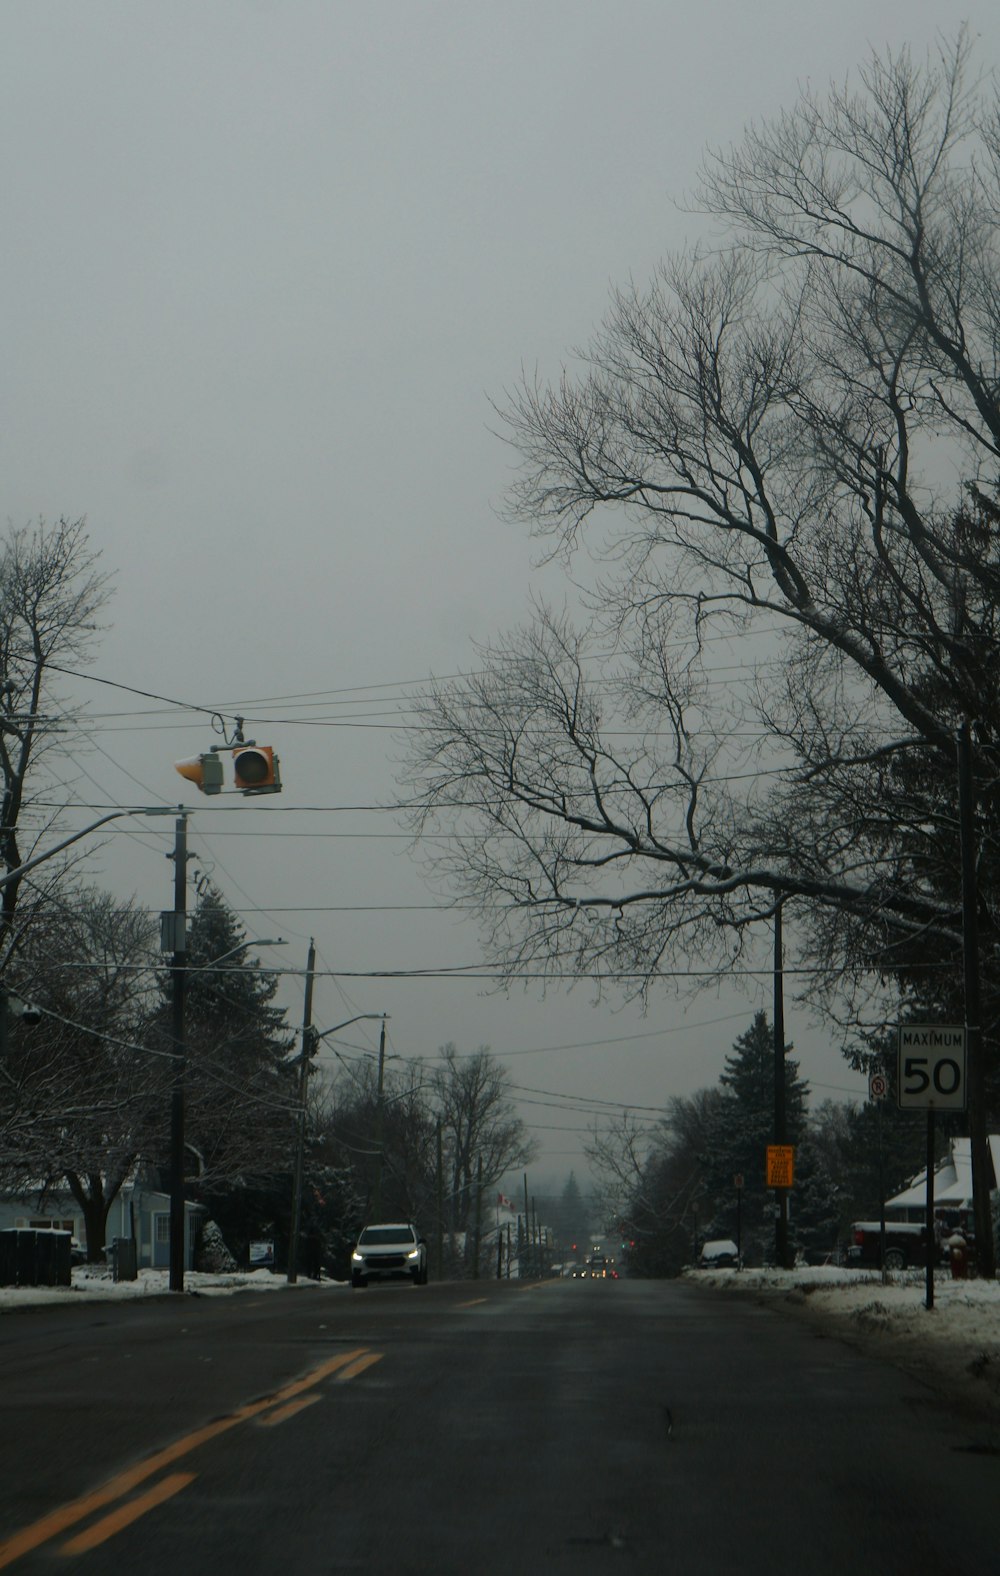 a snowy street with a traffic light and trees